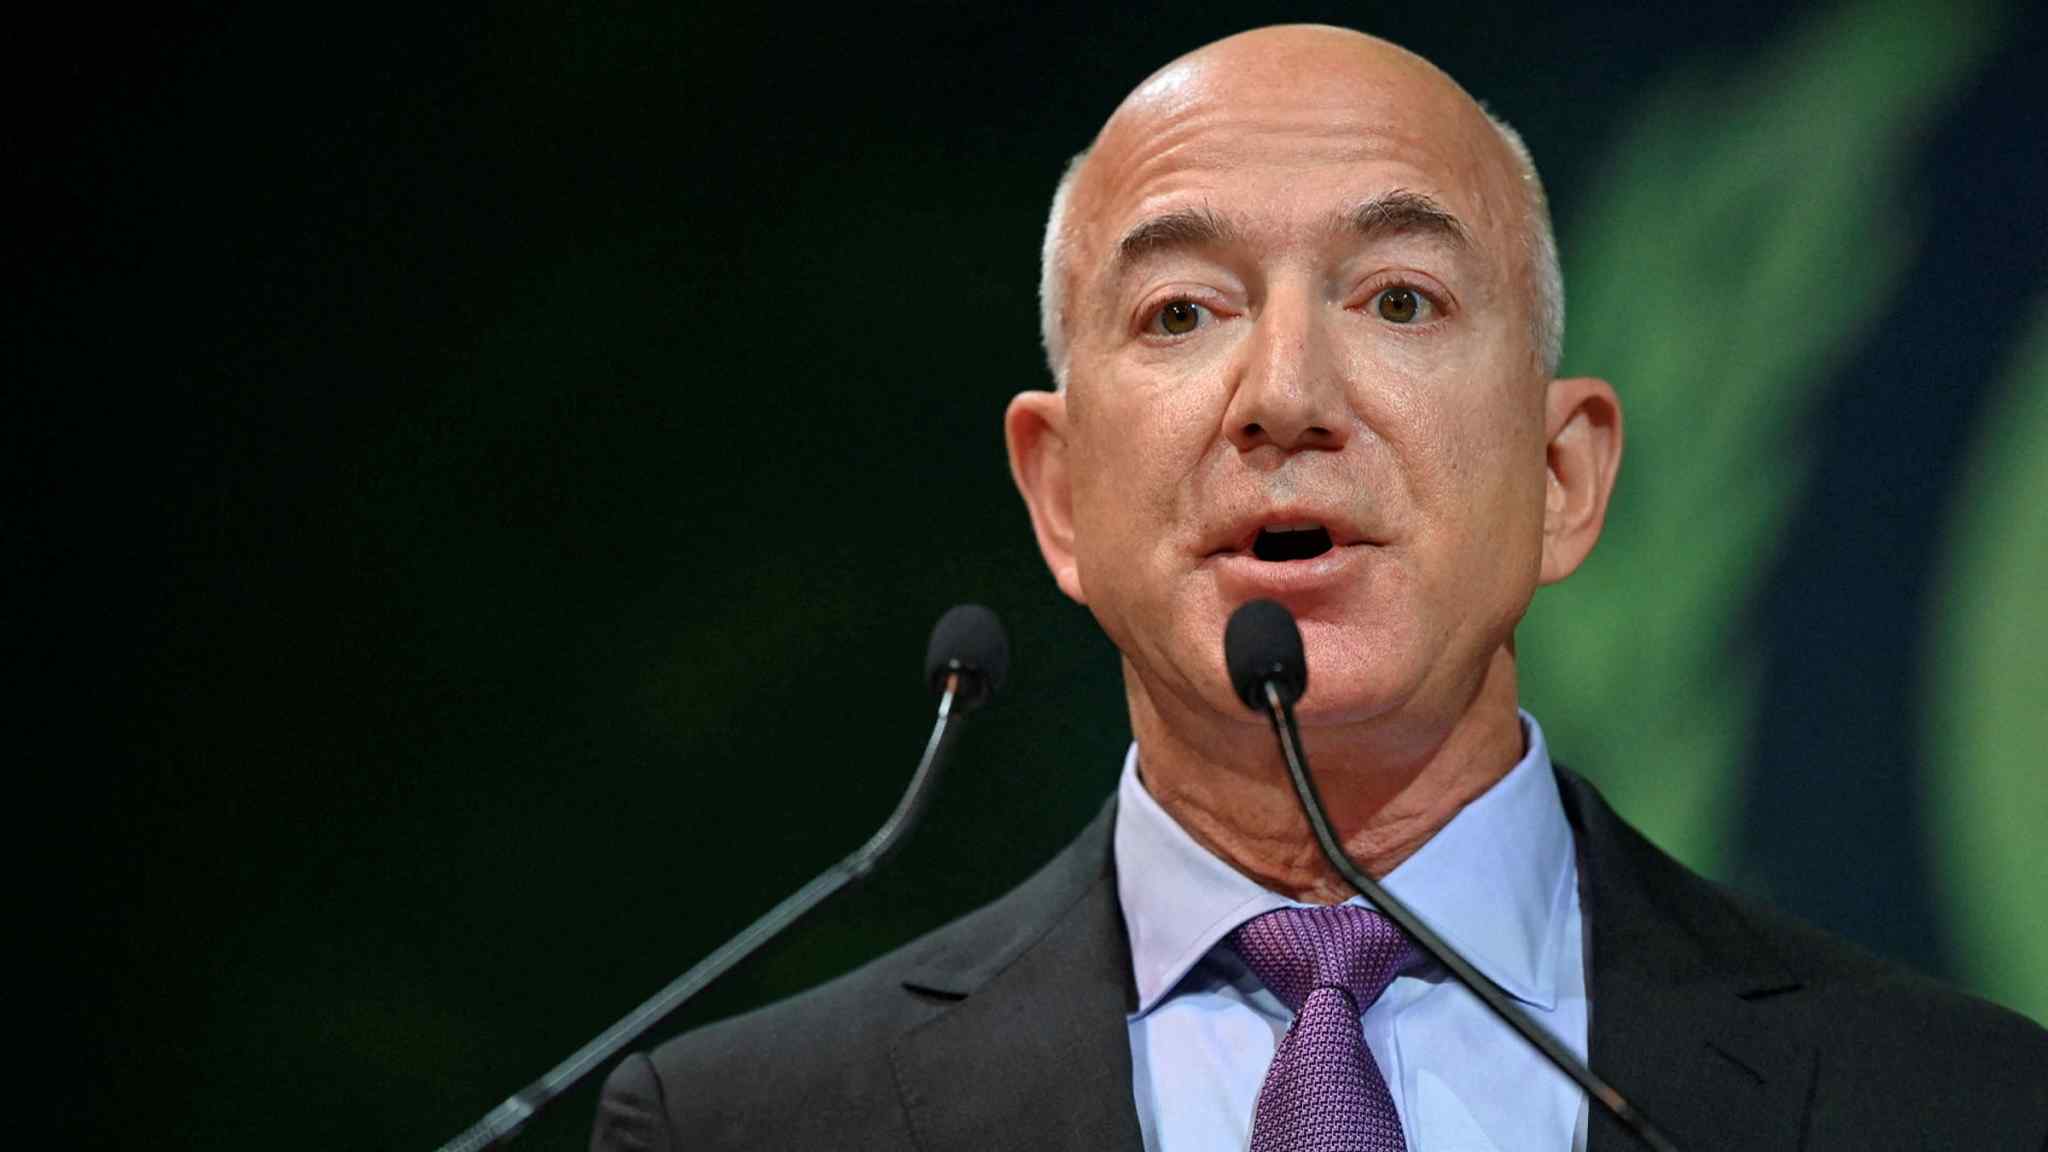 Bezos clashes with Biden administration again over inflation